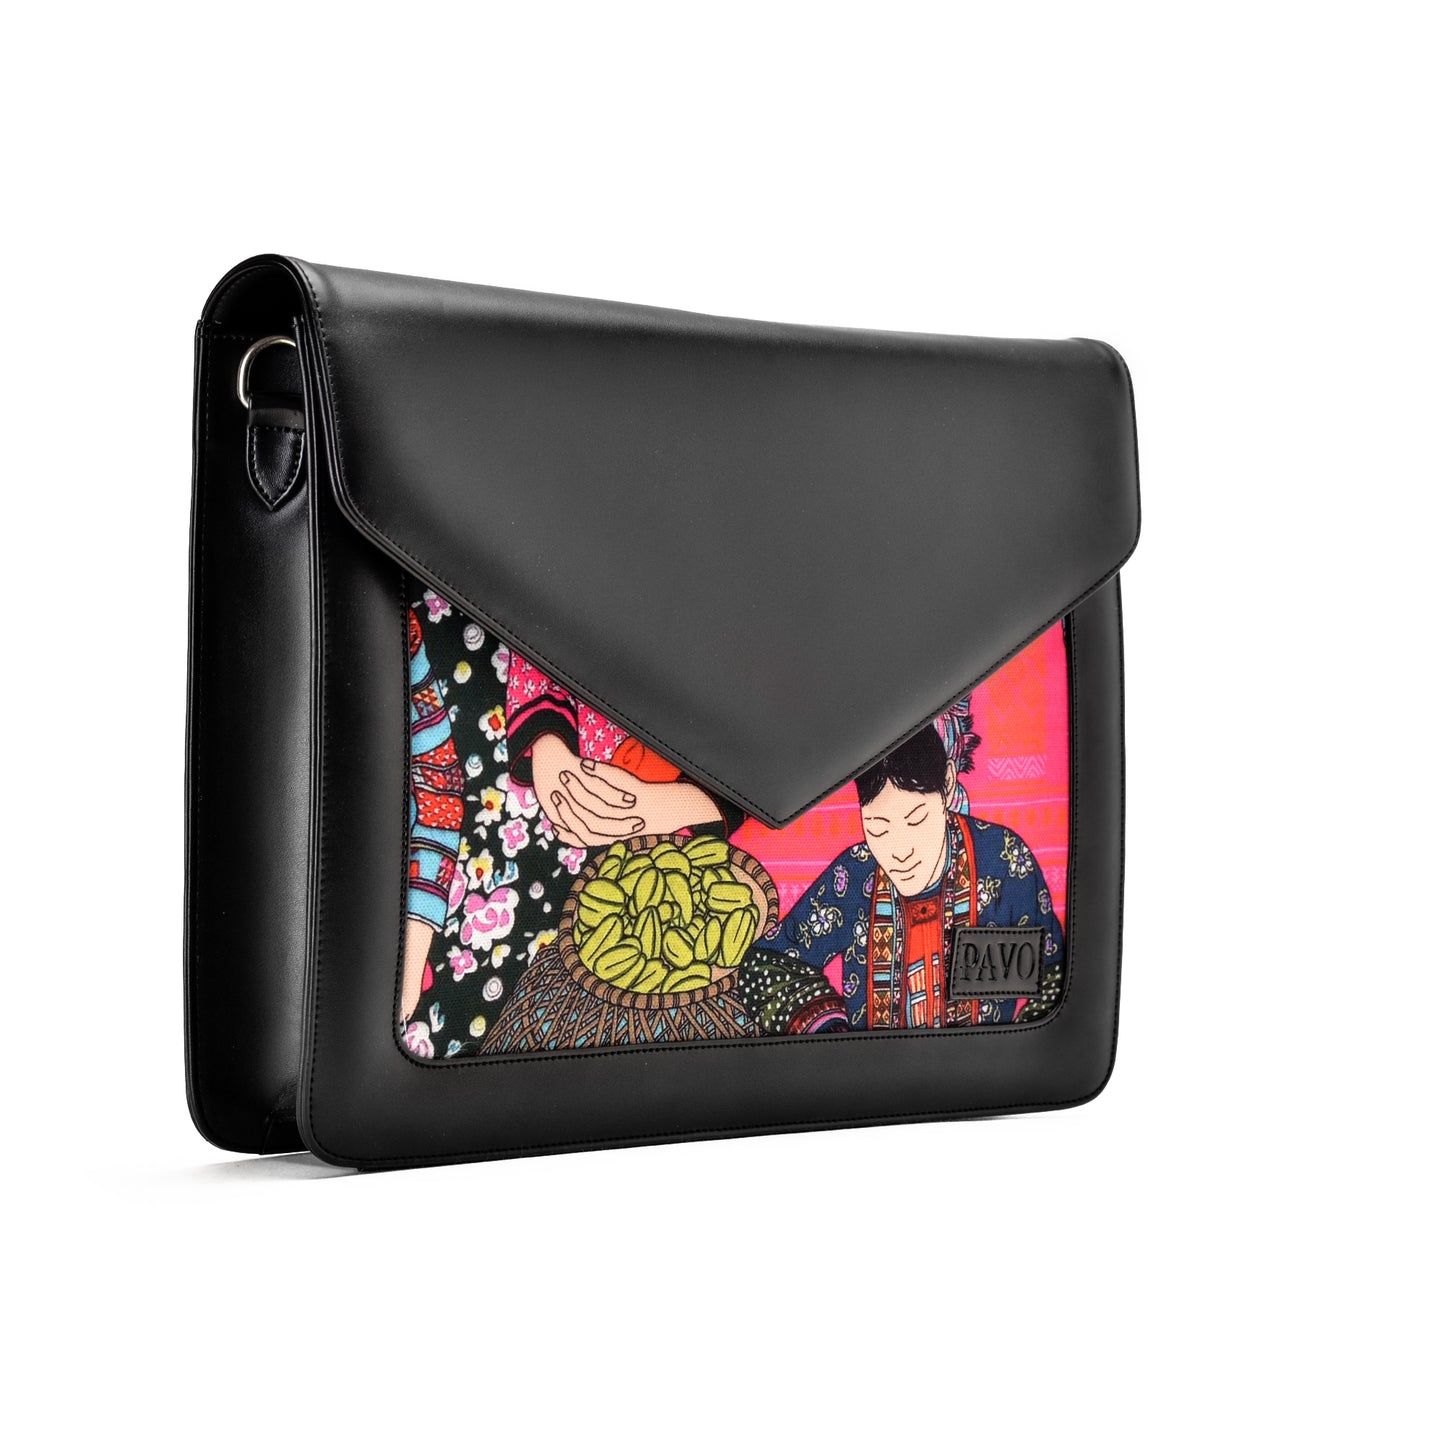 Laptop Bag/Sleeve Black with Multi color